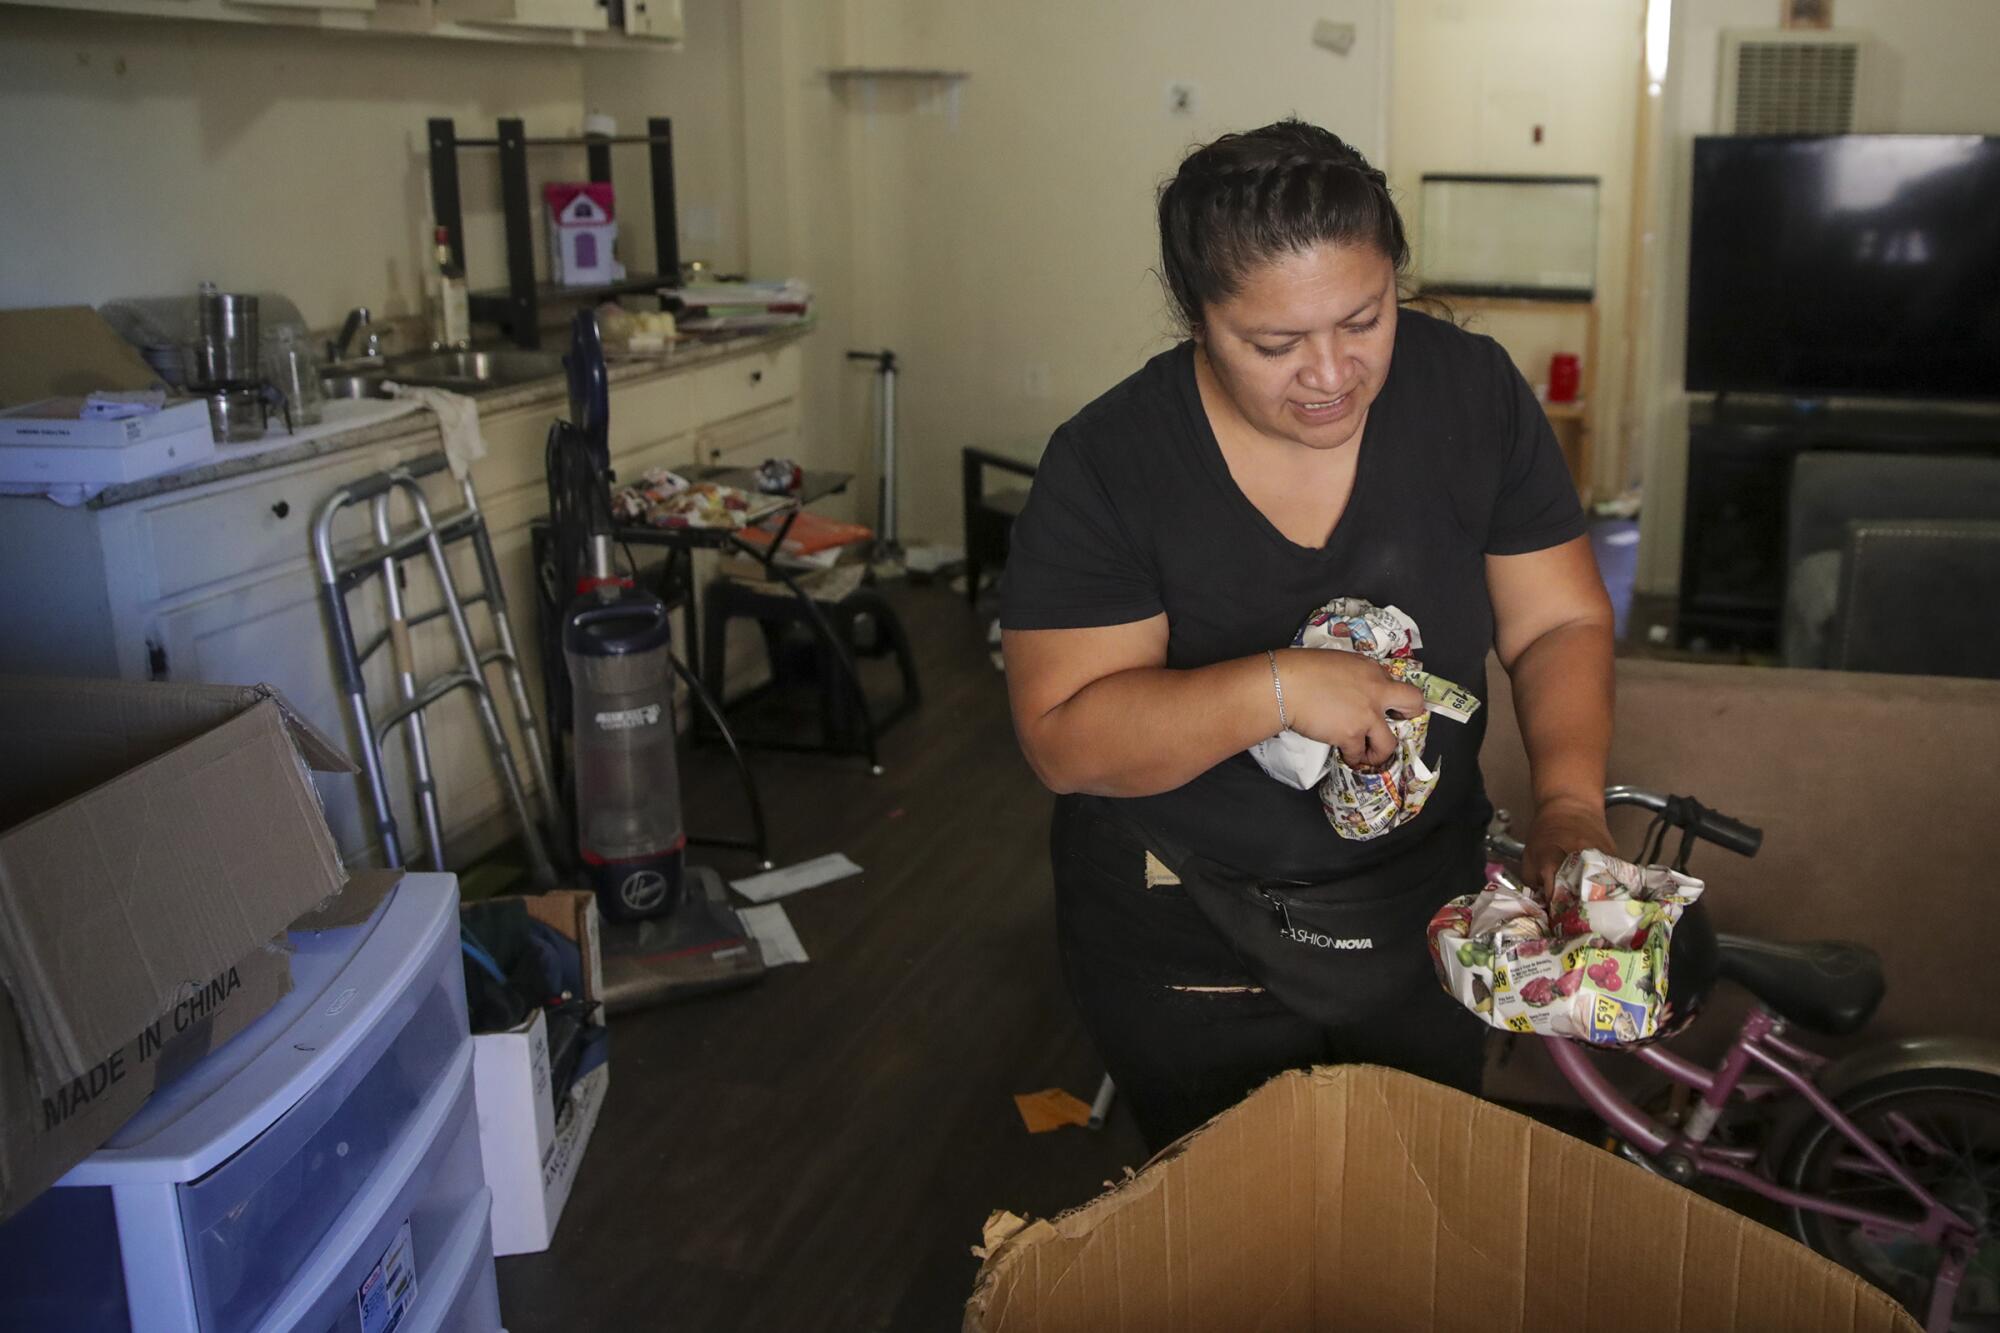 Juana Oceguera, packs items in her apartment on 700 block of East 27th Street.